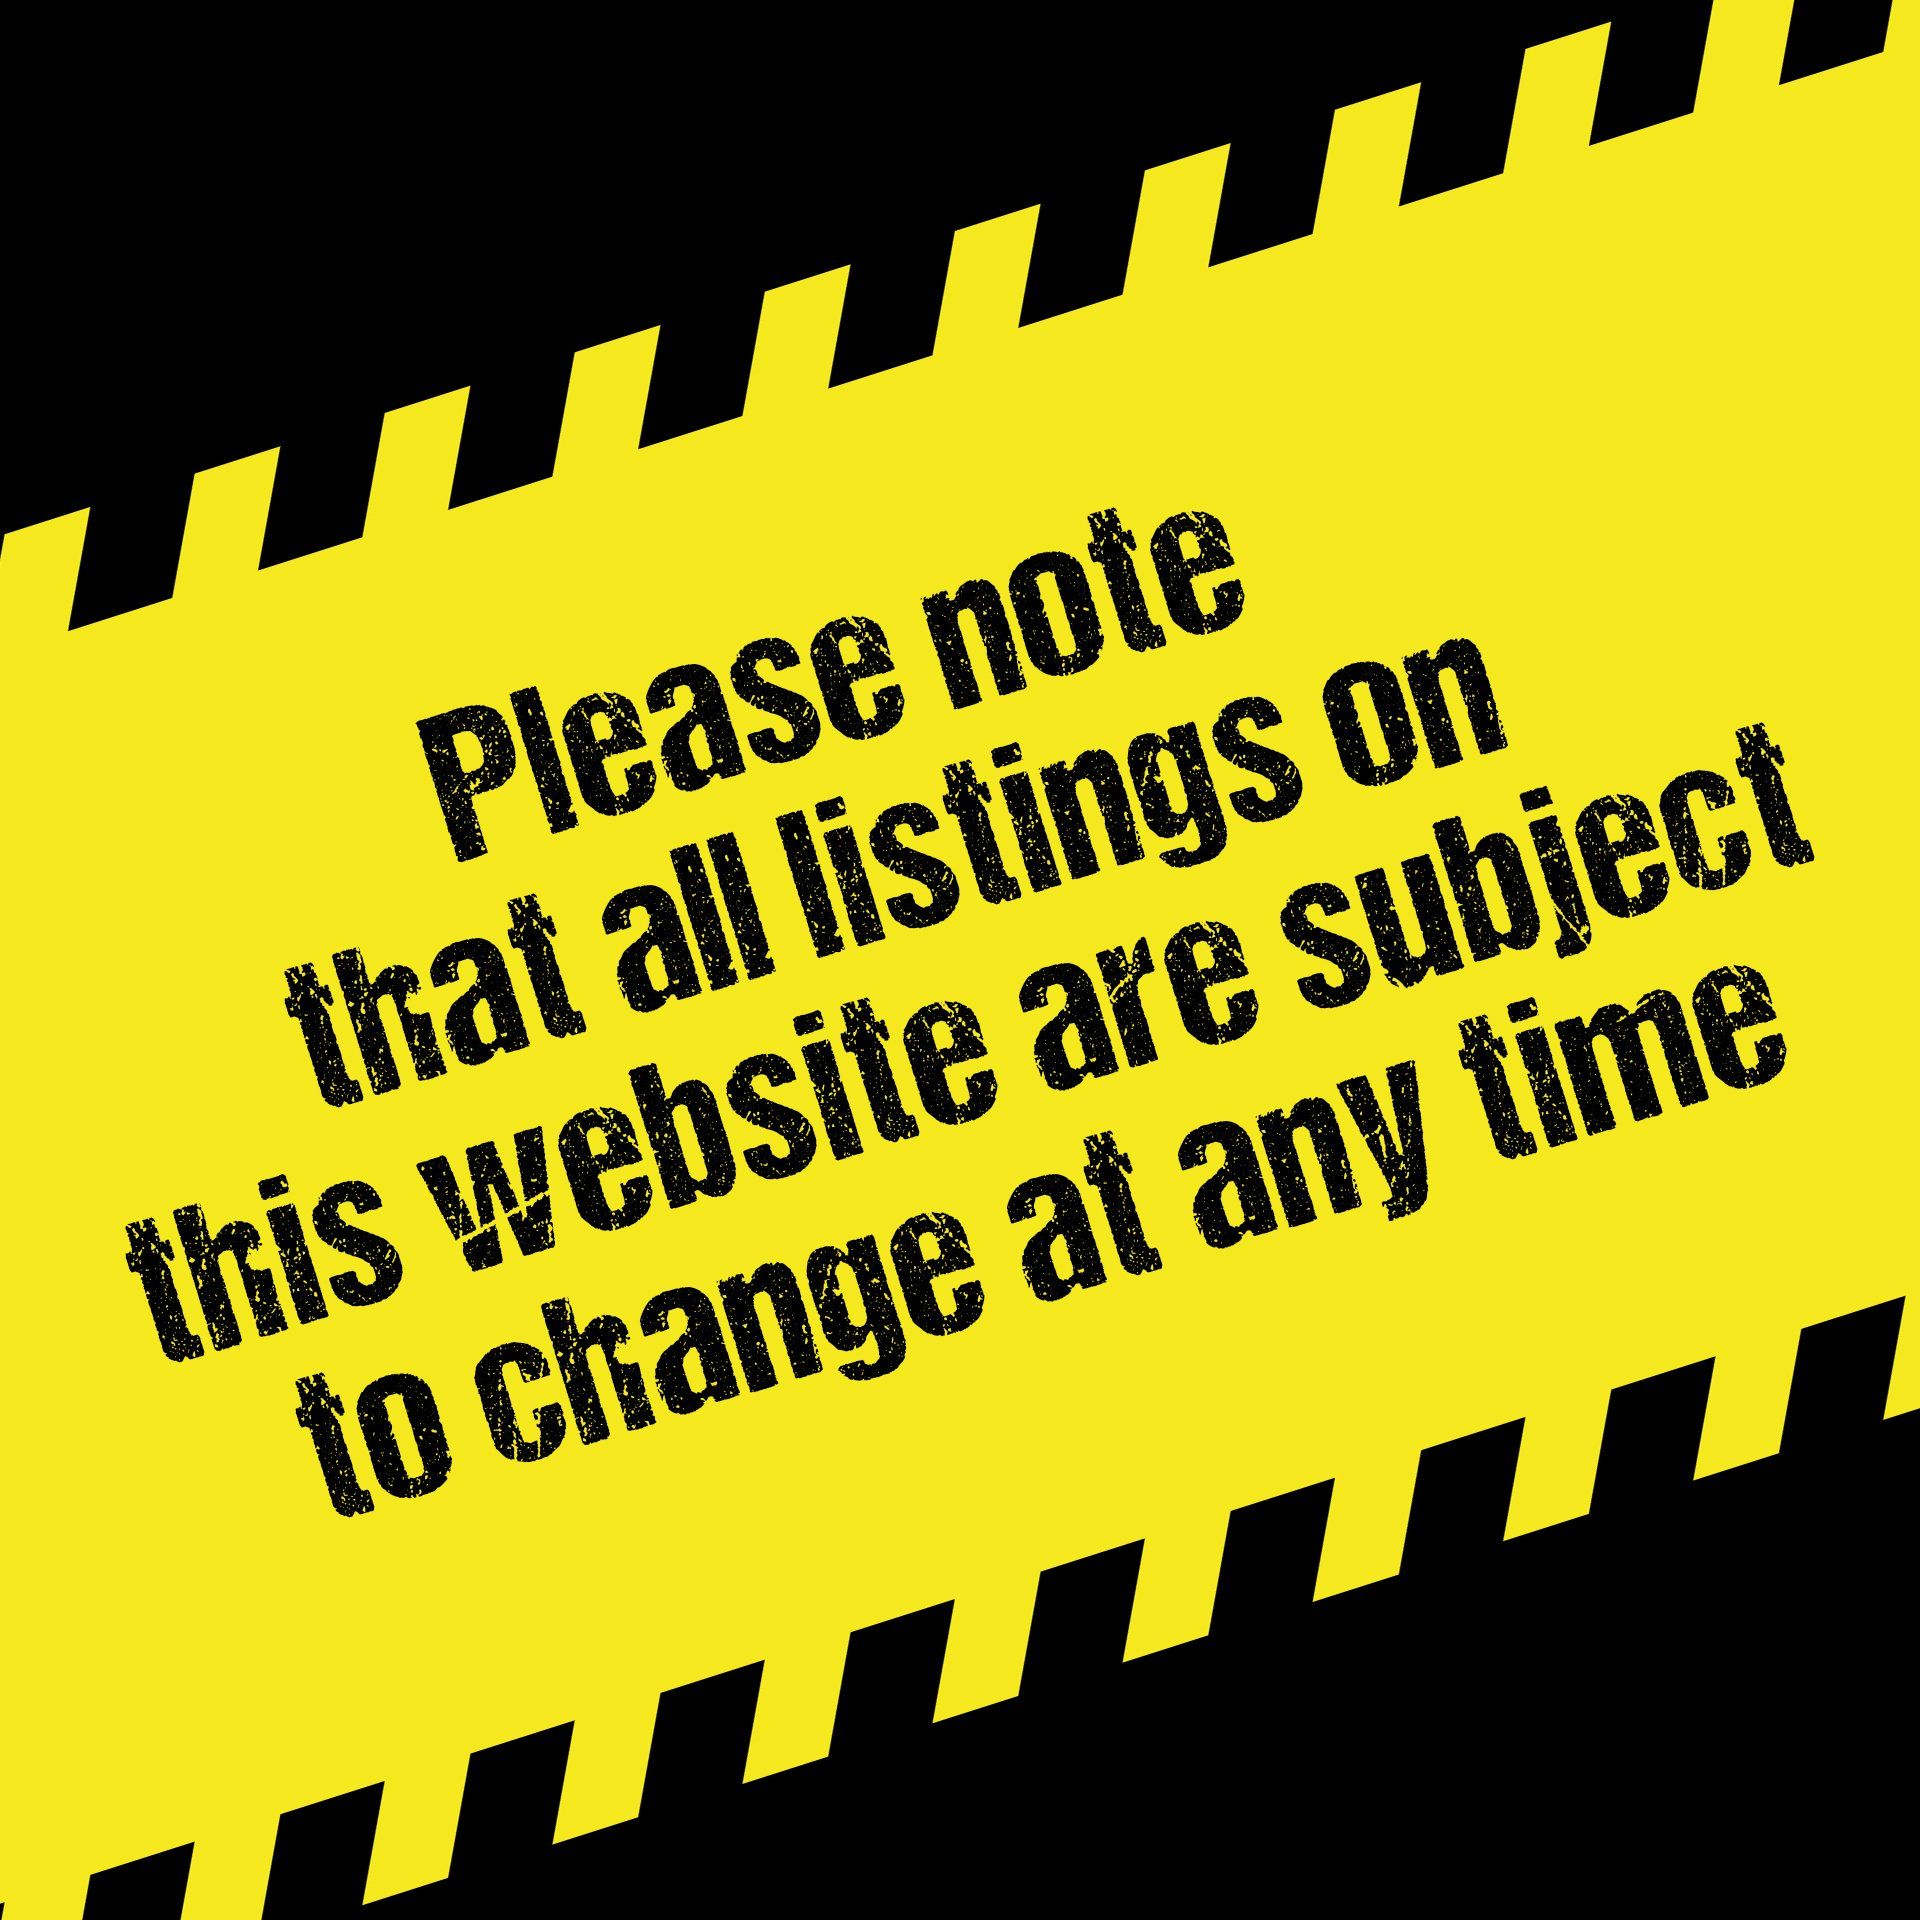 Listings are subject to change at any time